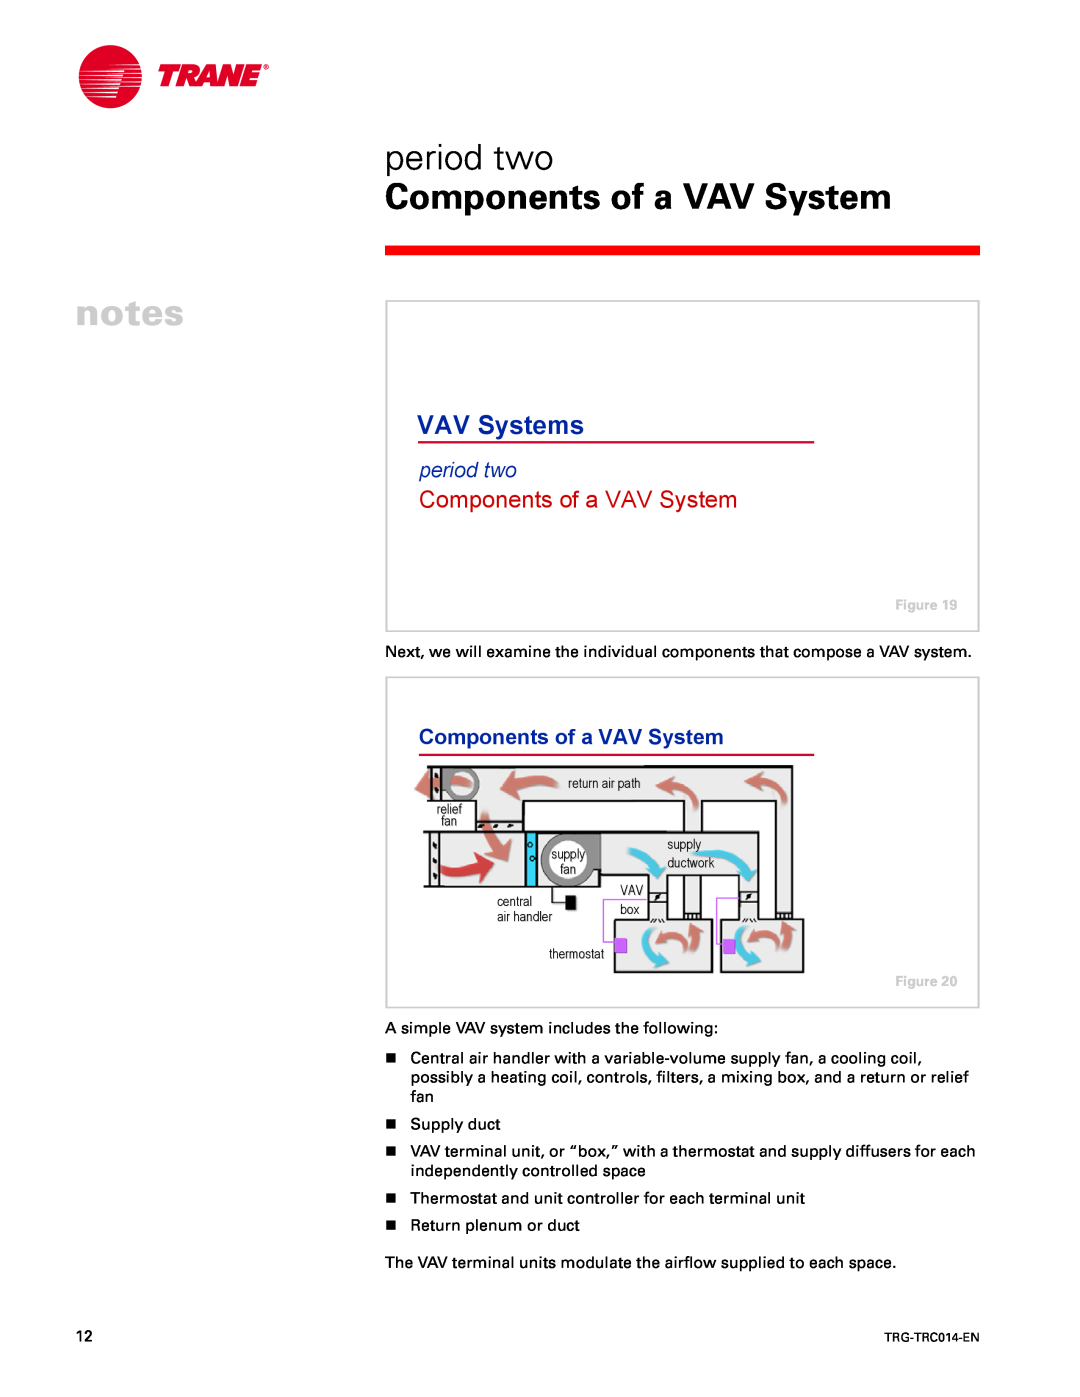 Trane TRG-TRC014-EN manual period two, Components of a VAV System, VAV Systems 